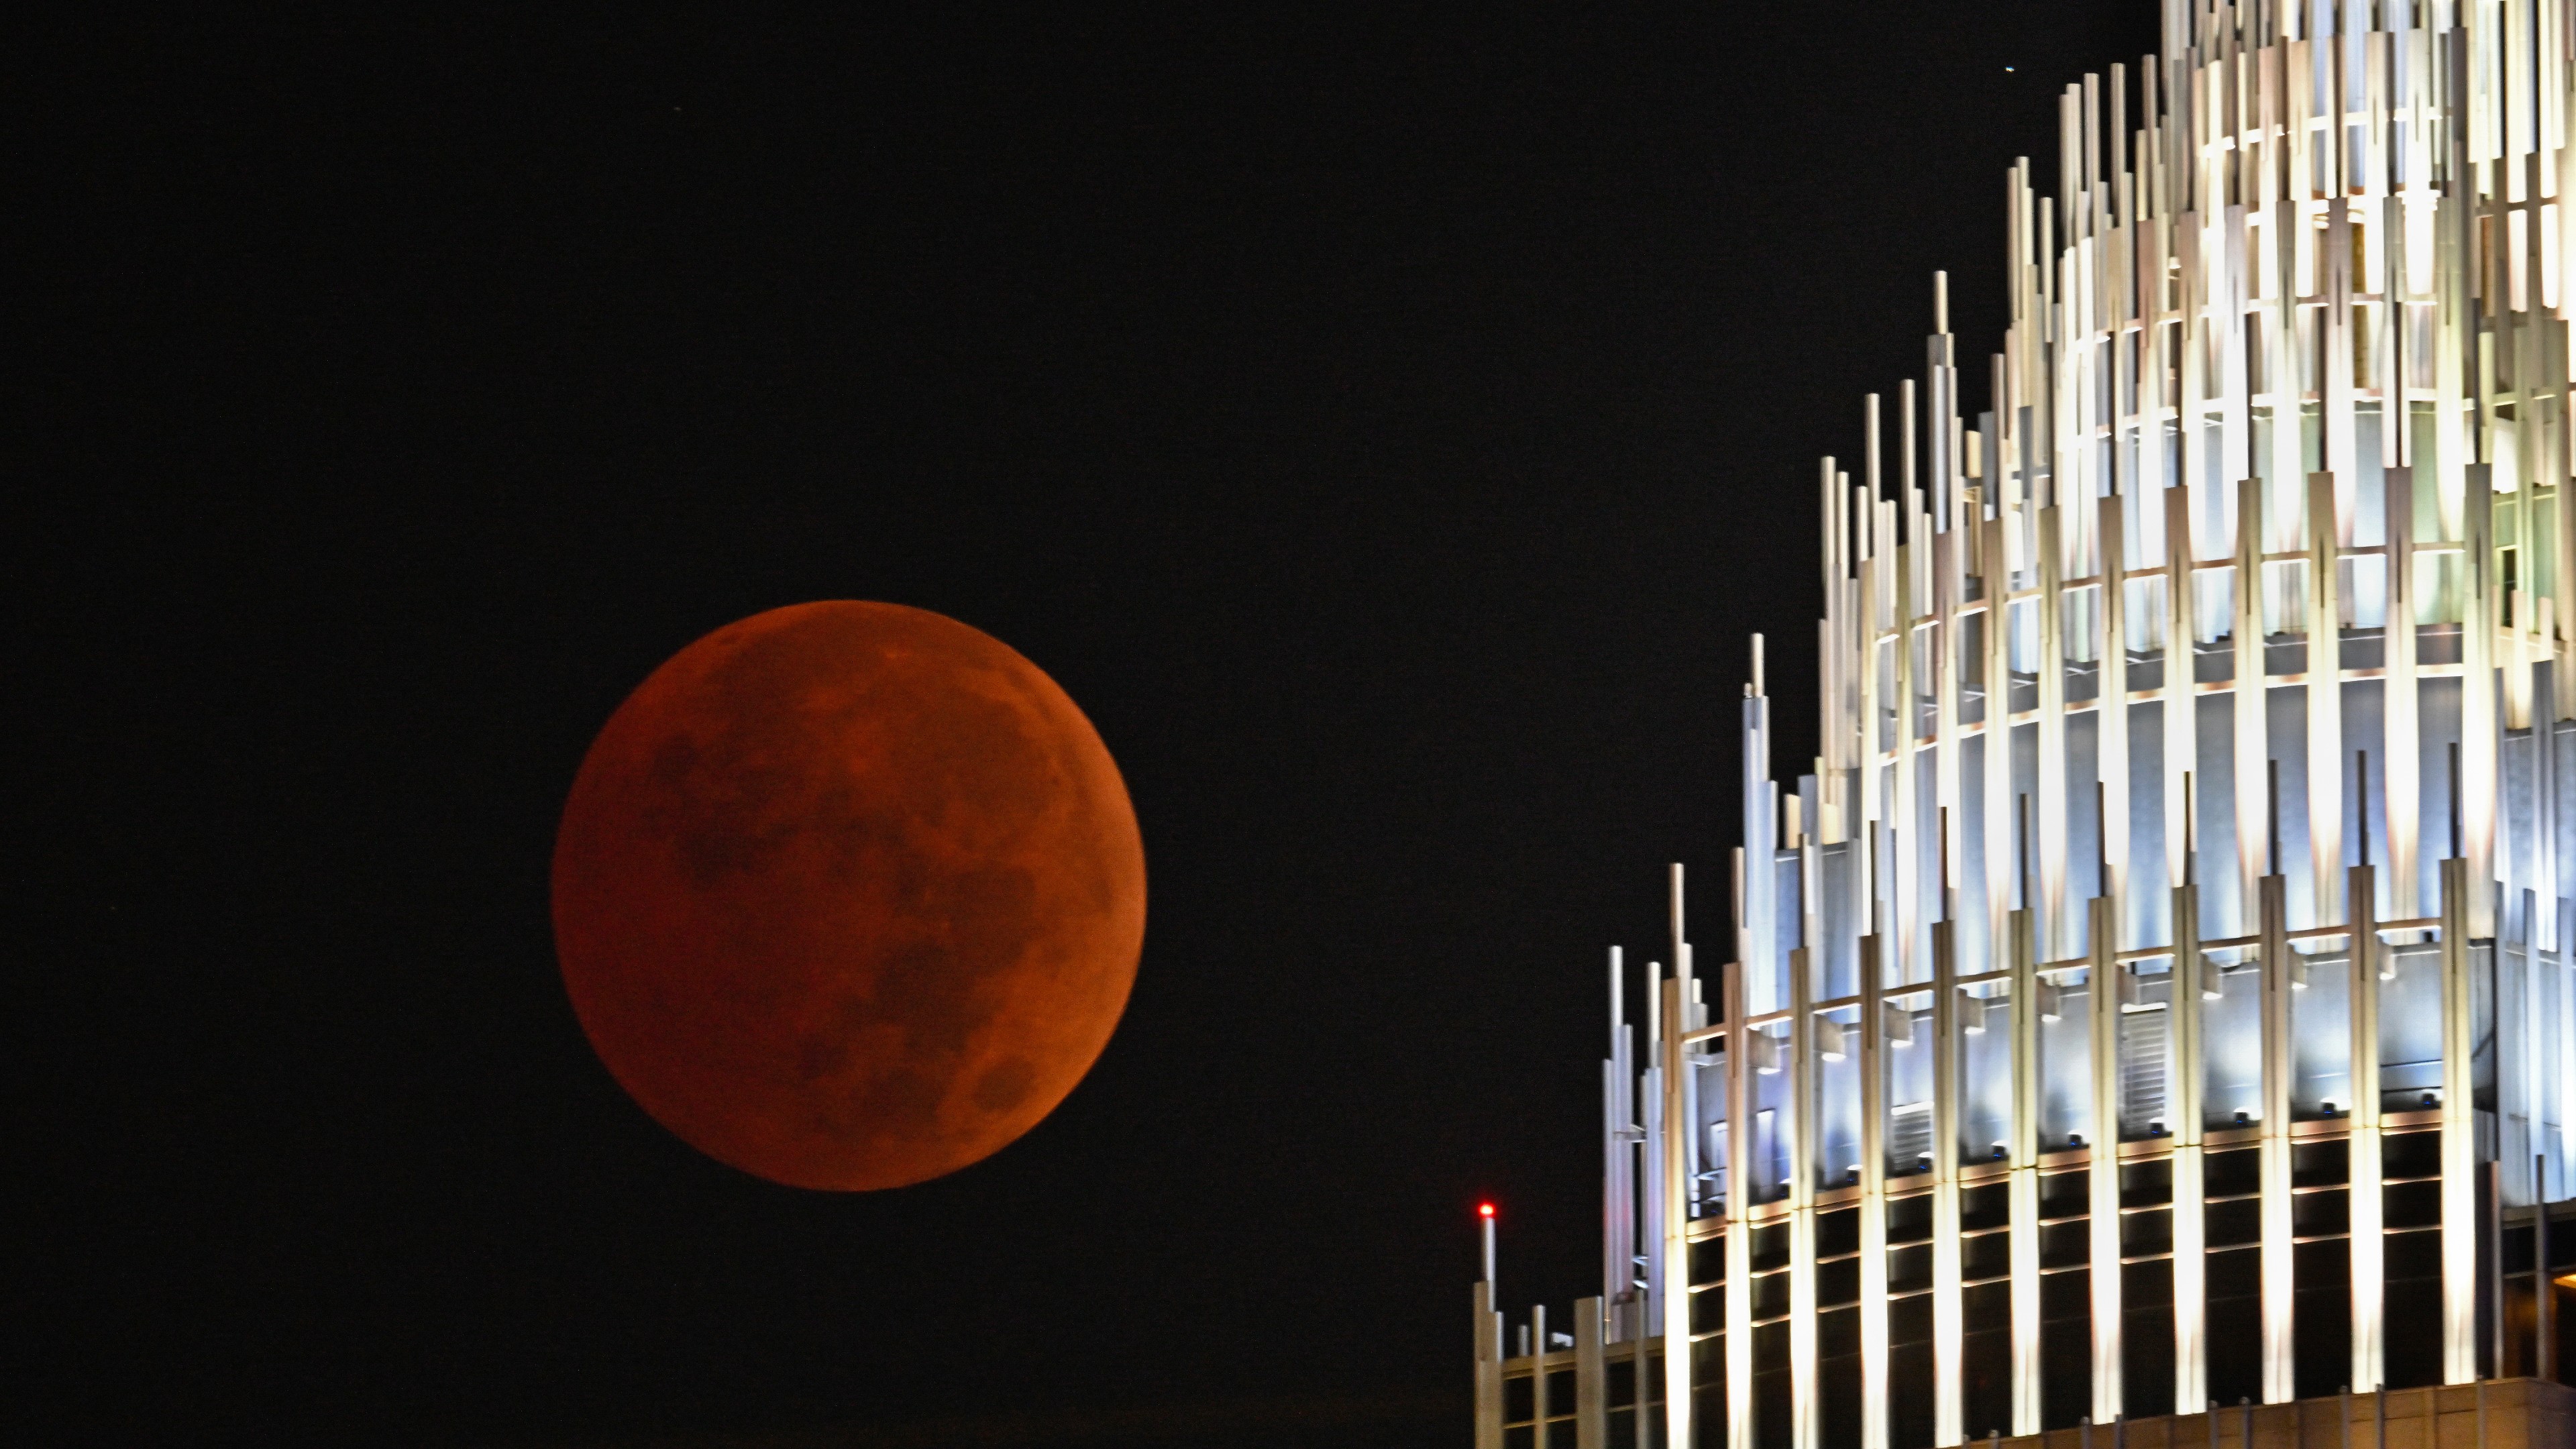 The blood moon rises over Charlotte, North Carolina, on Nov. 8, 2022. (Photo by Peter Zay/Anadolu Agency via Getty Images)